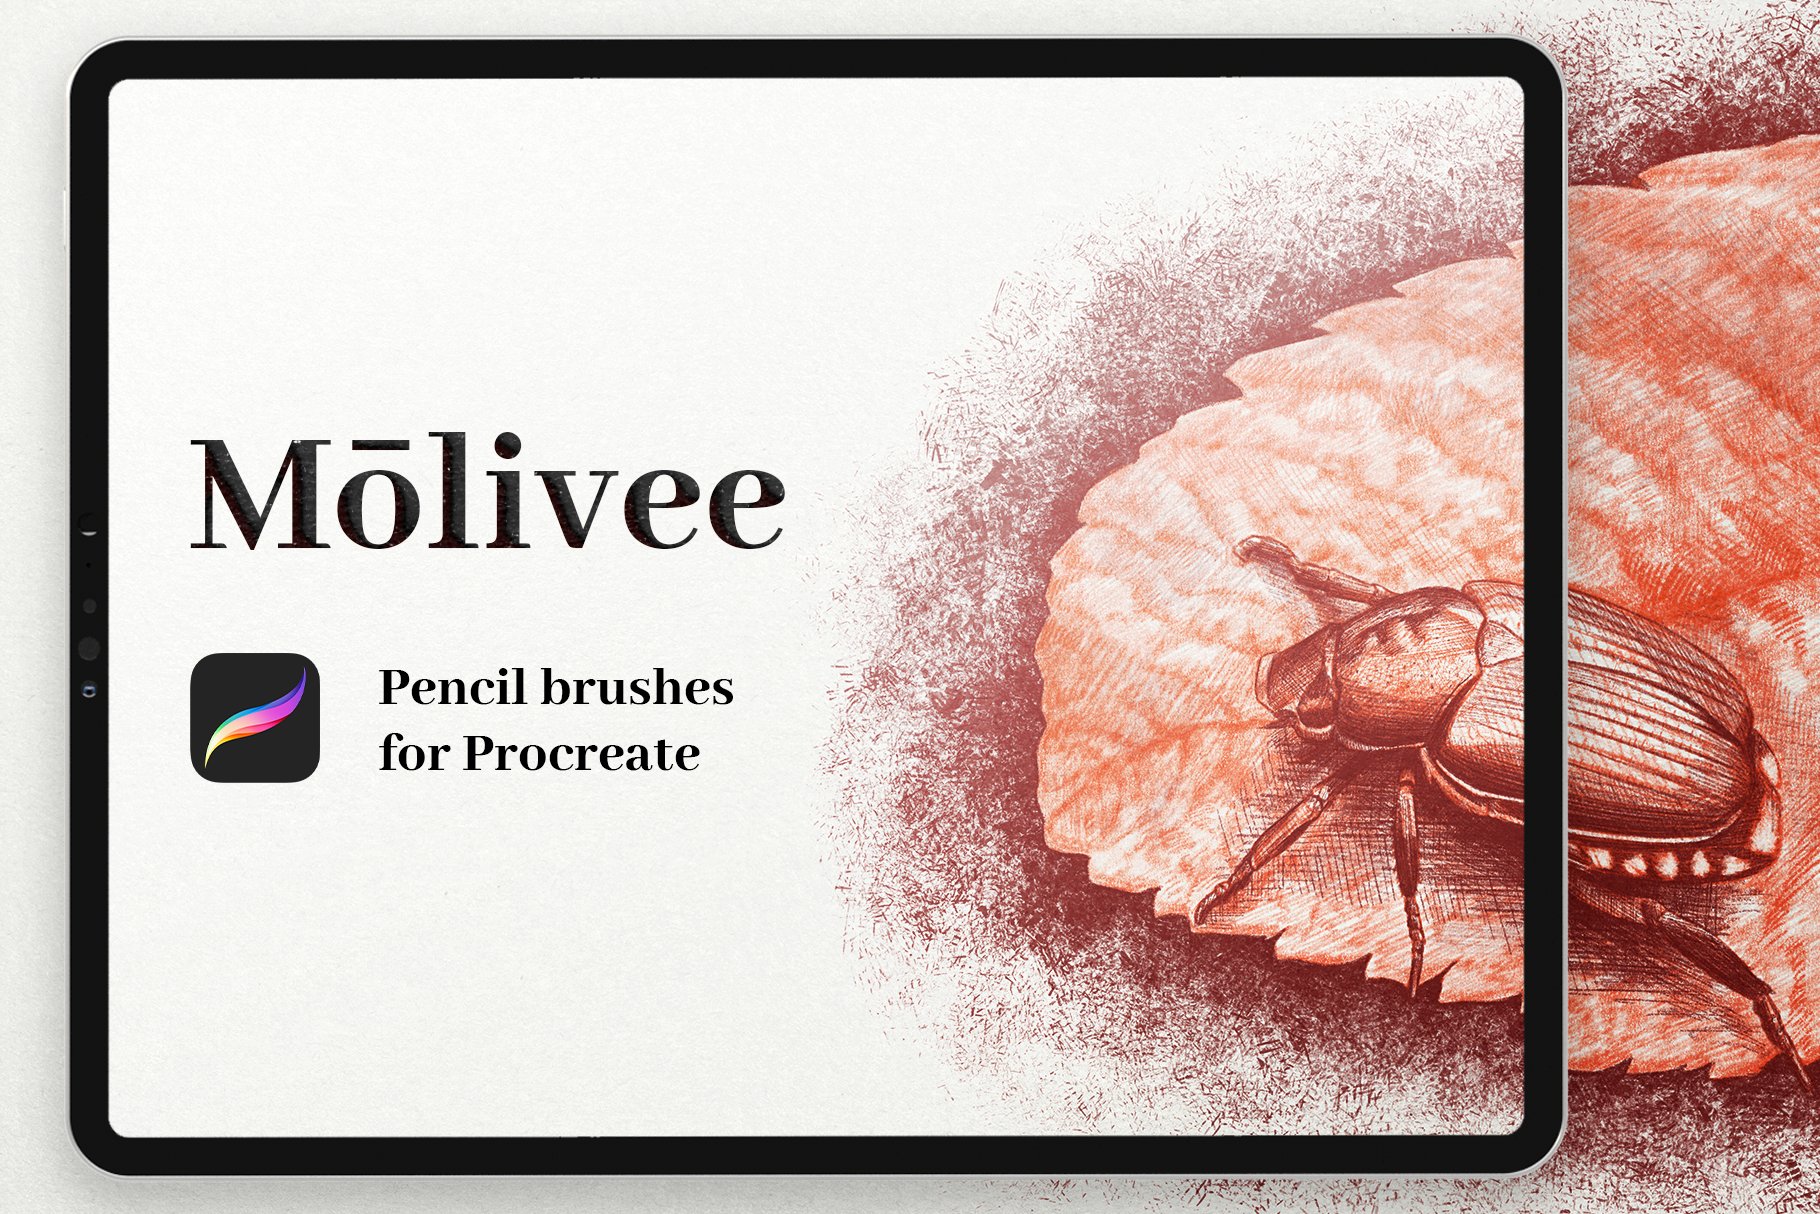 Molivee Pencil Brushes for Procreate cover image.